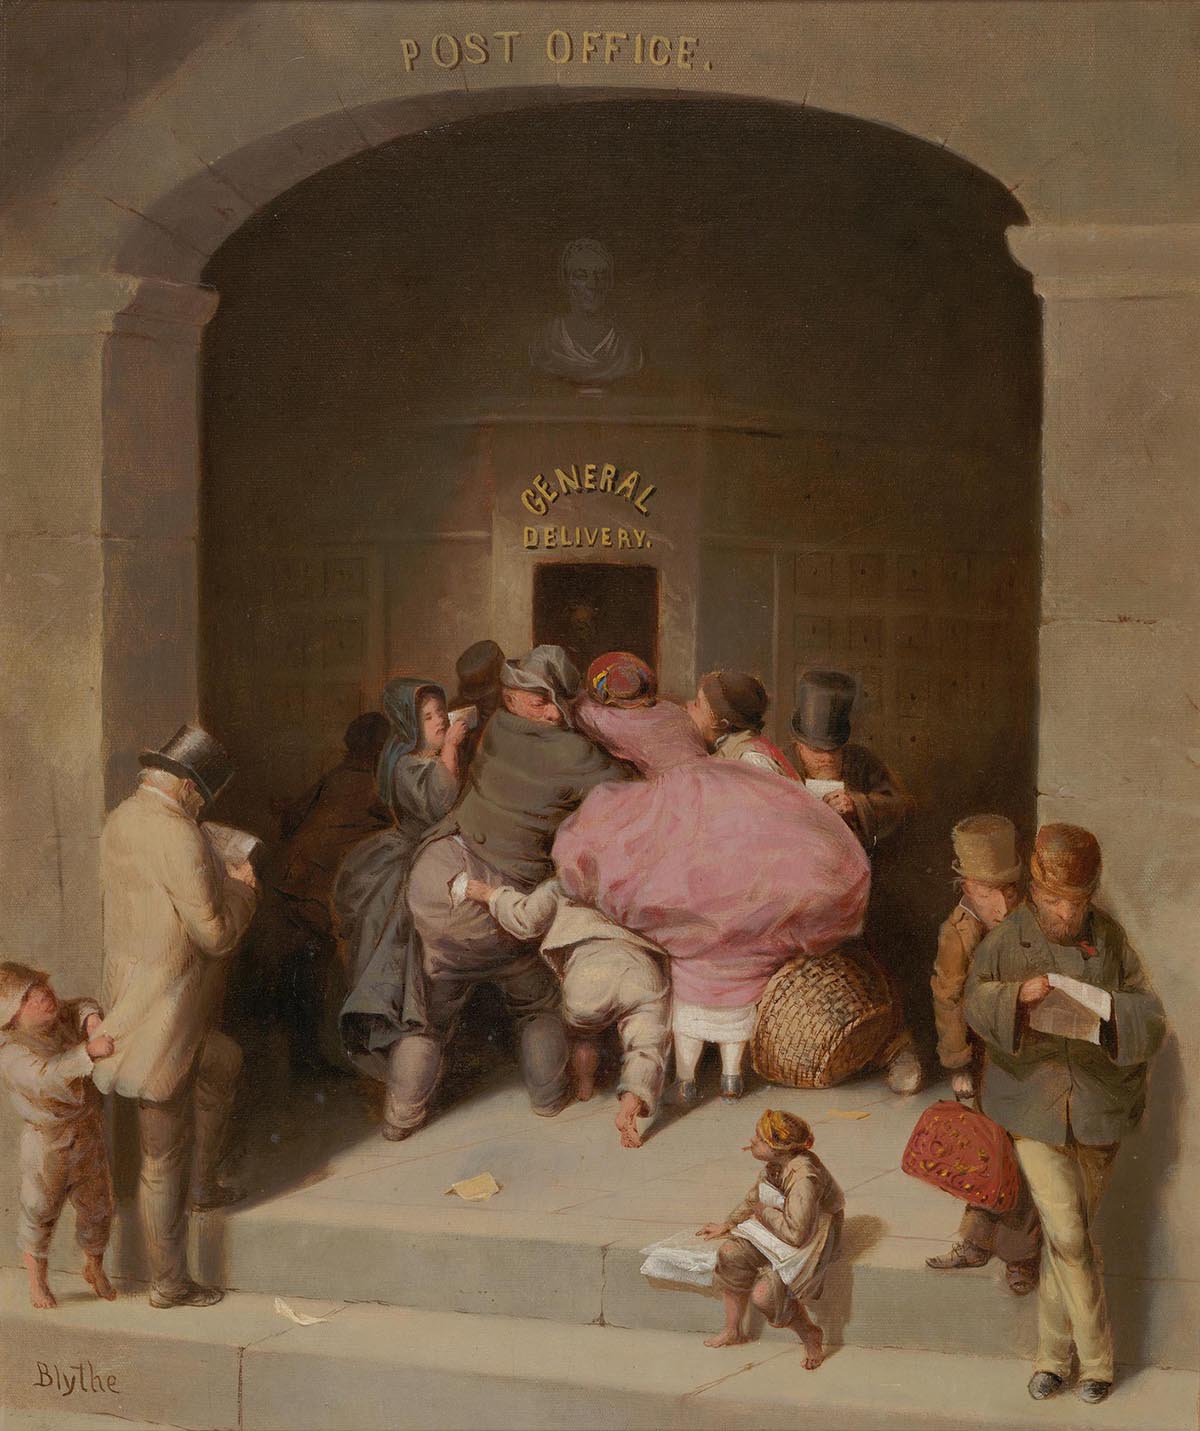 Eight people from the 1800s–men, women, and children–crowd around a Post Office door. Off to the right and left of the door, men are standing on the steps reading while young children attempt to get their attention to sell them newspapers. 